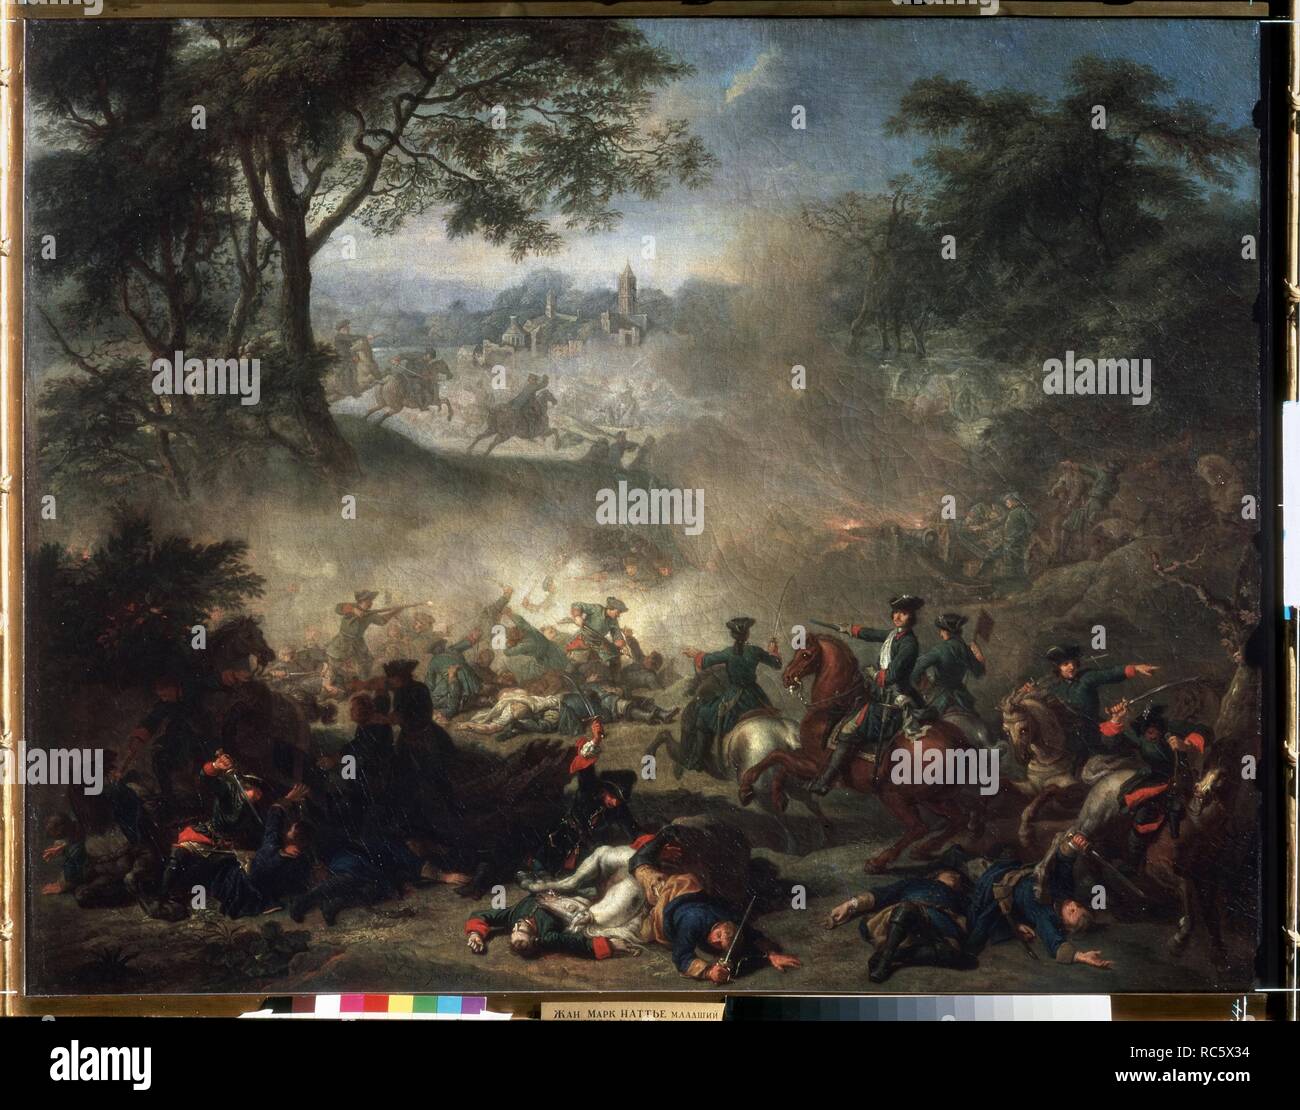 The Battle of Lesnaya. Museum: State A. Pushkin Museum of Fine Arts, Moscow. Author: NATTIER, JEAN-MARC. Stock Photo